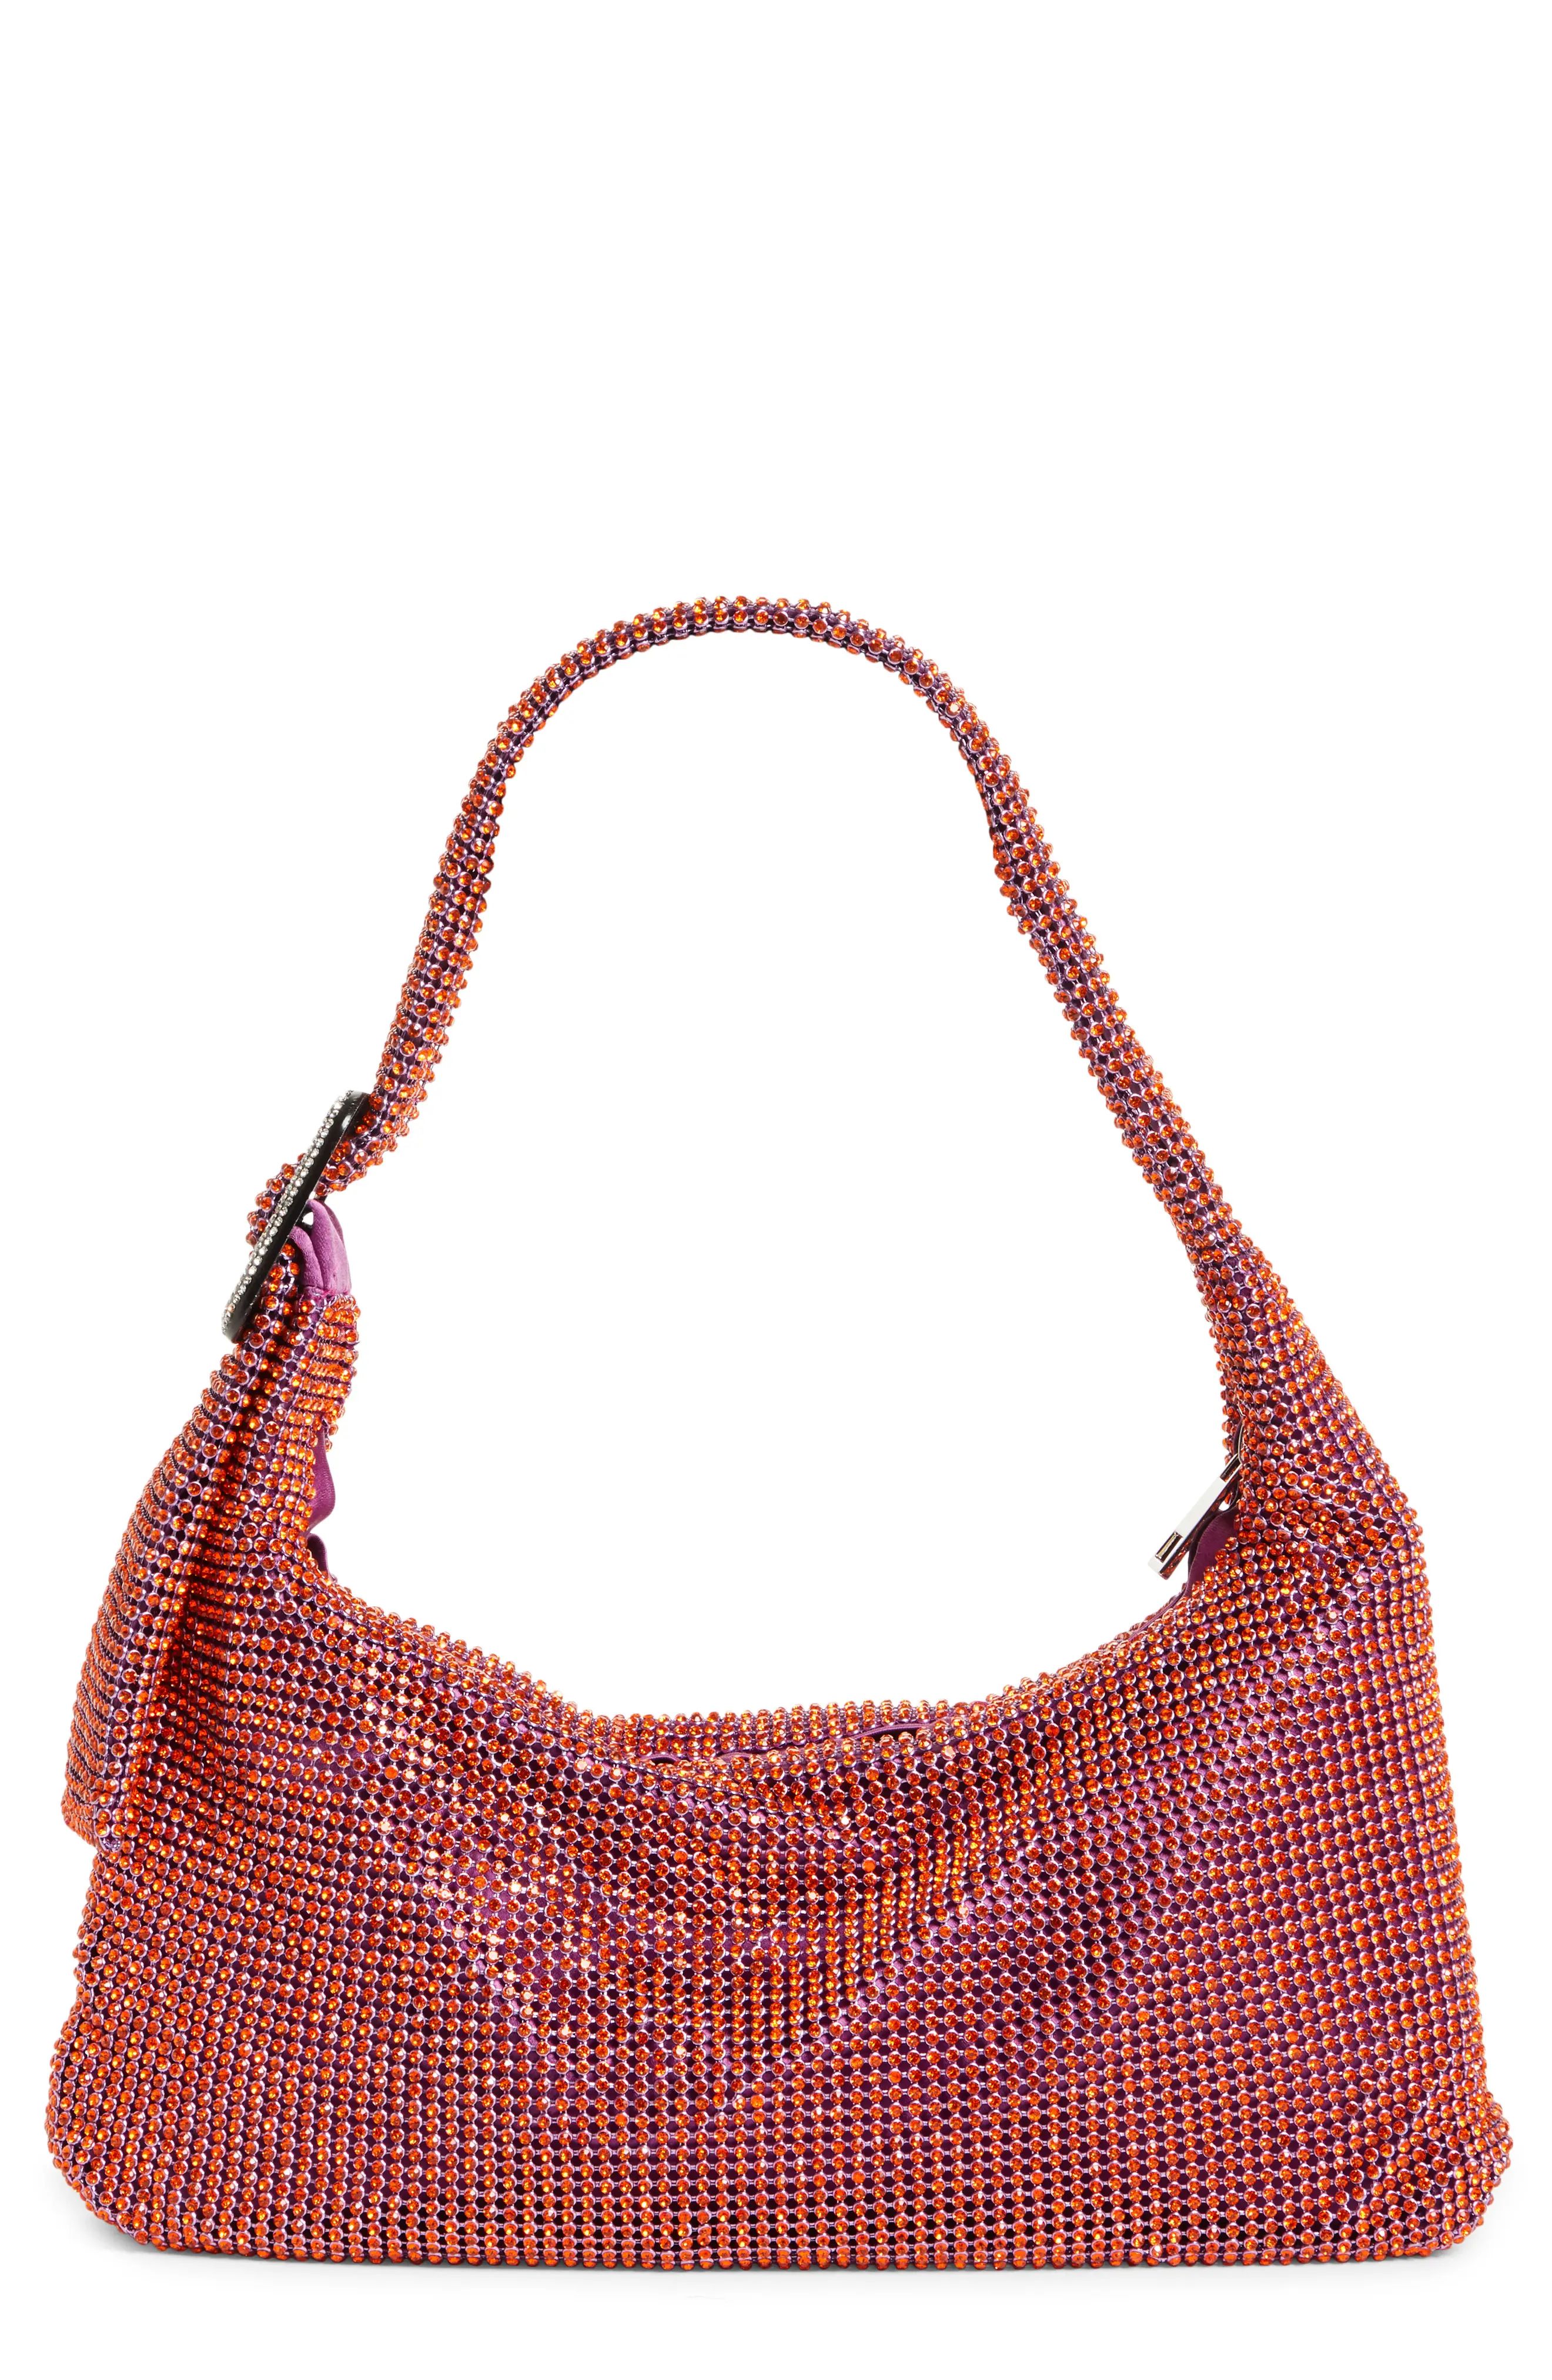 Benedetta Bruzziches Benedatta Bruzziches Pina Bausch Crystal Mesh Hobo in Sunset With The Queen at  | Nordstrom